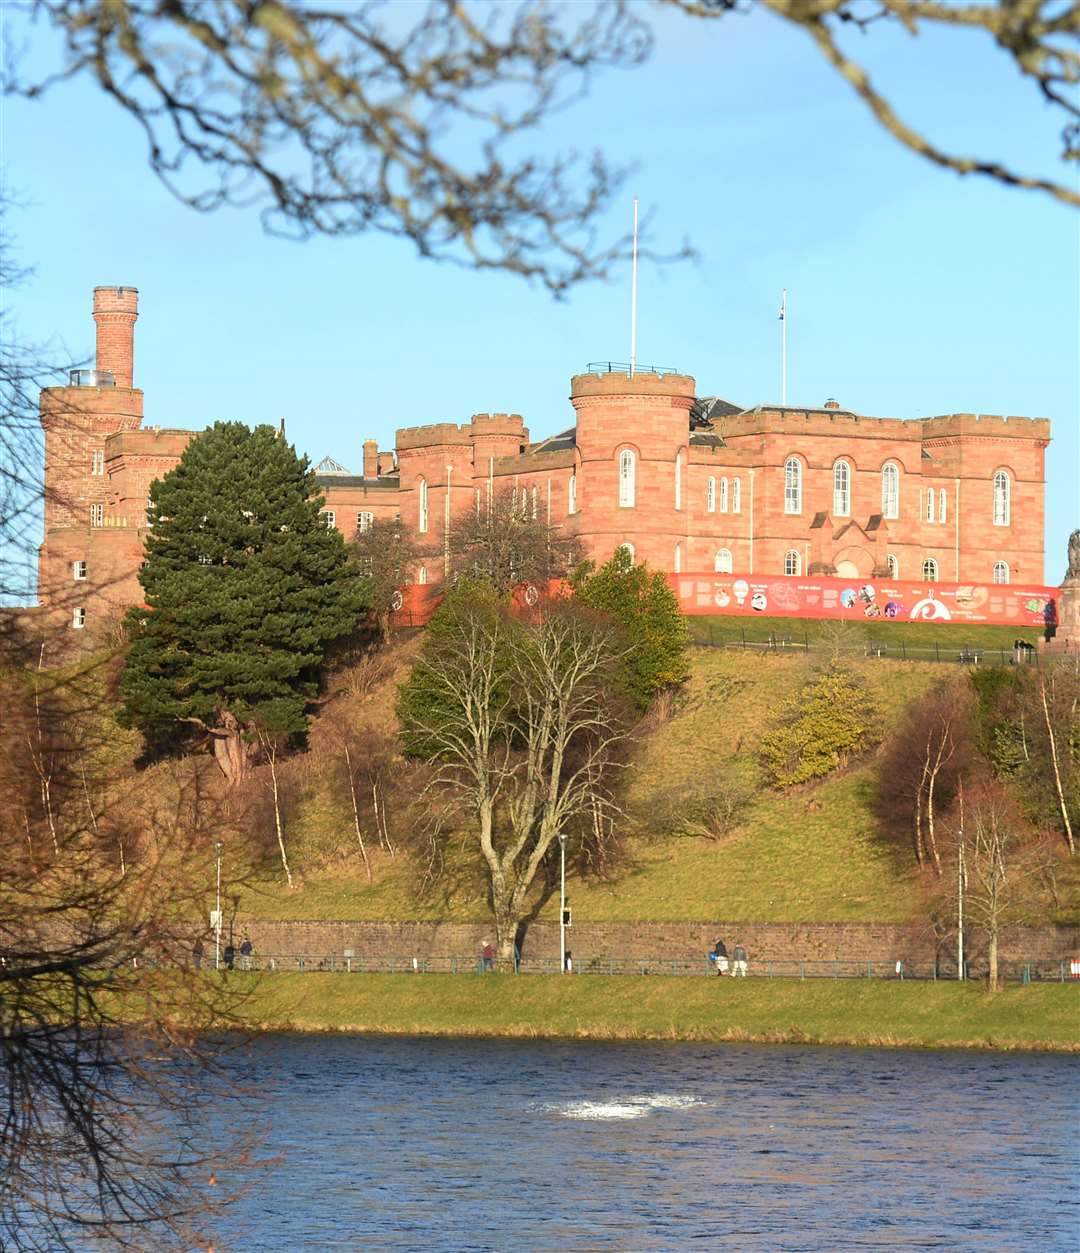 Trees around Inverness Castle have been surveyed.